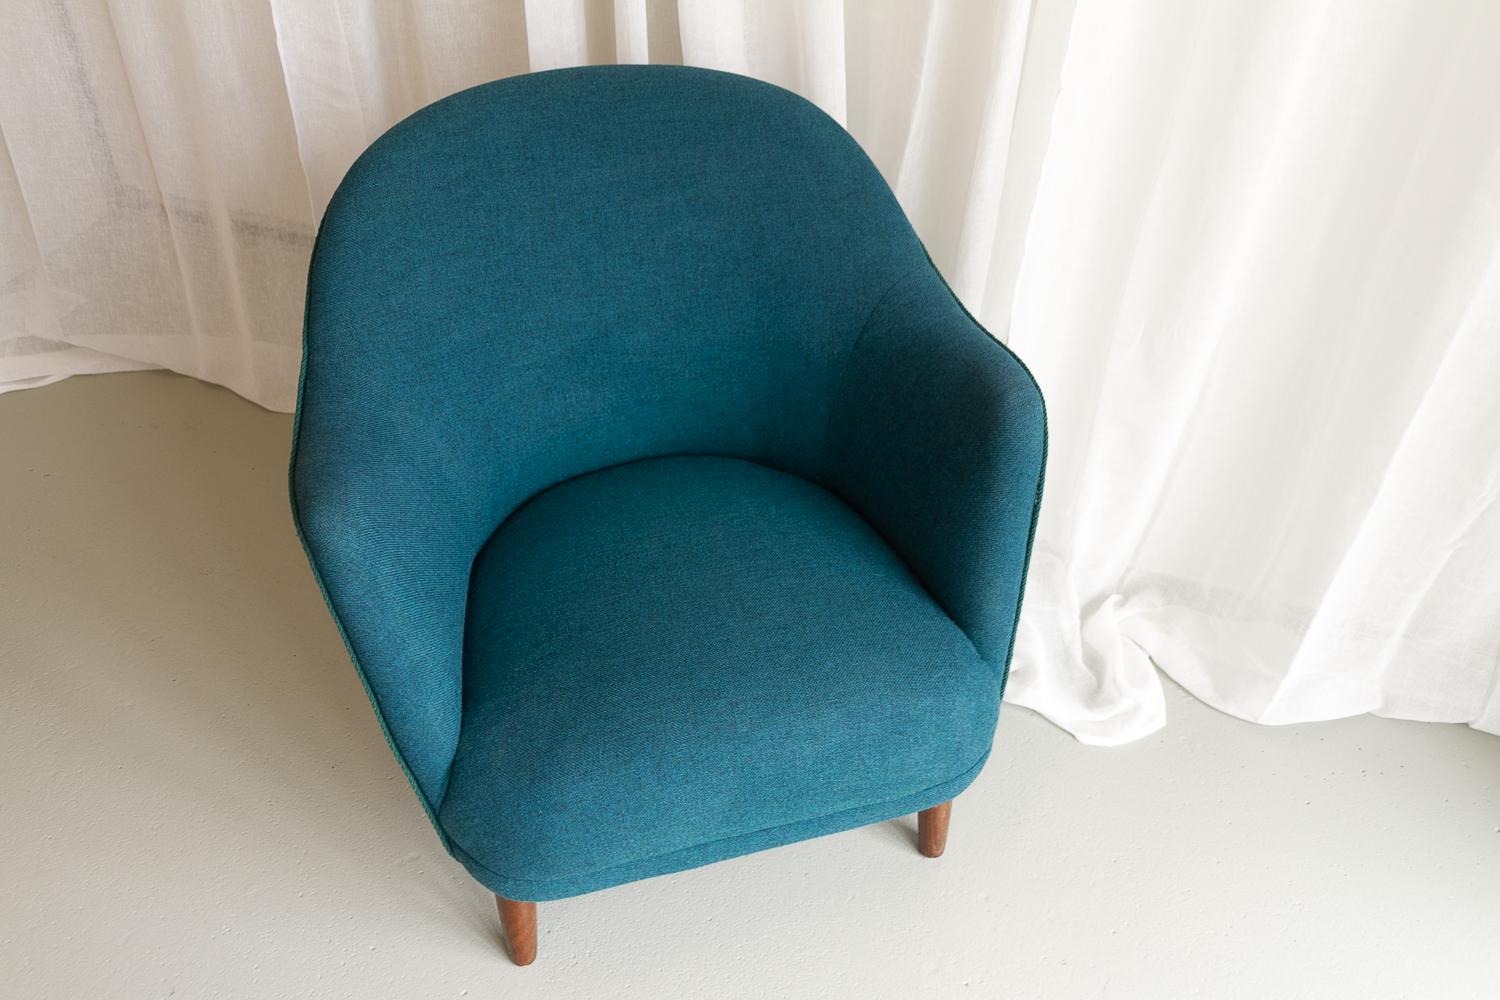 Wool Danish Modern Easy Chair in Teal Blue, 1950s. For Sale